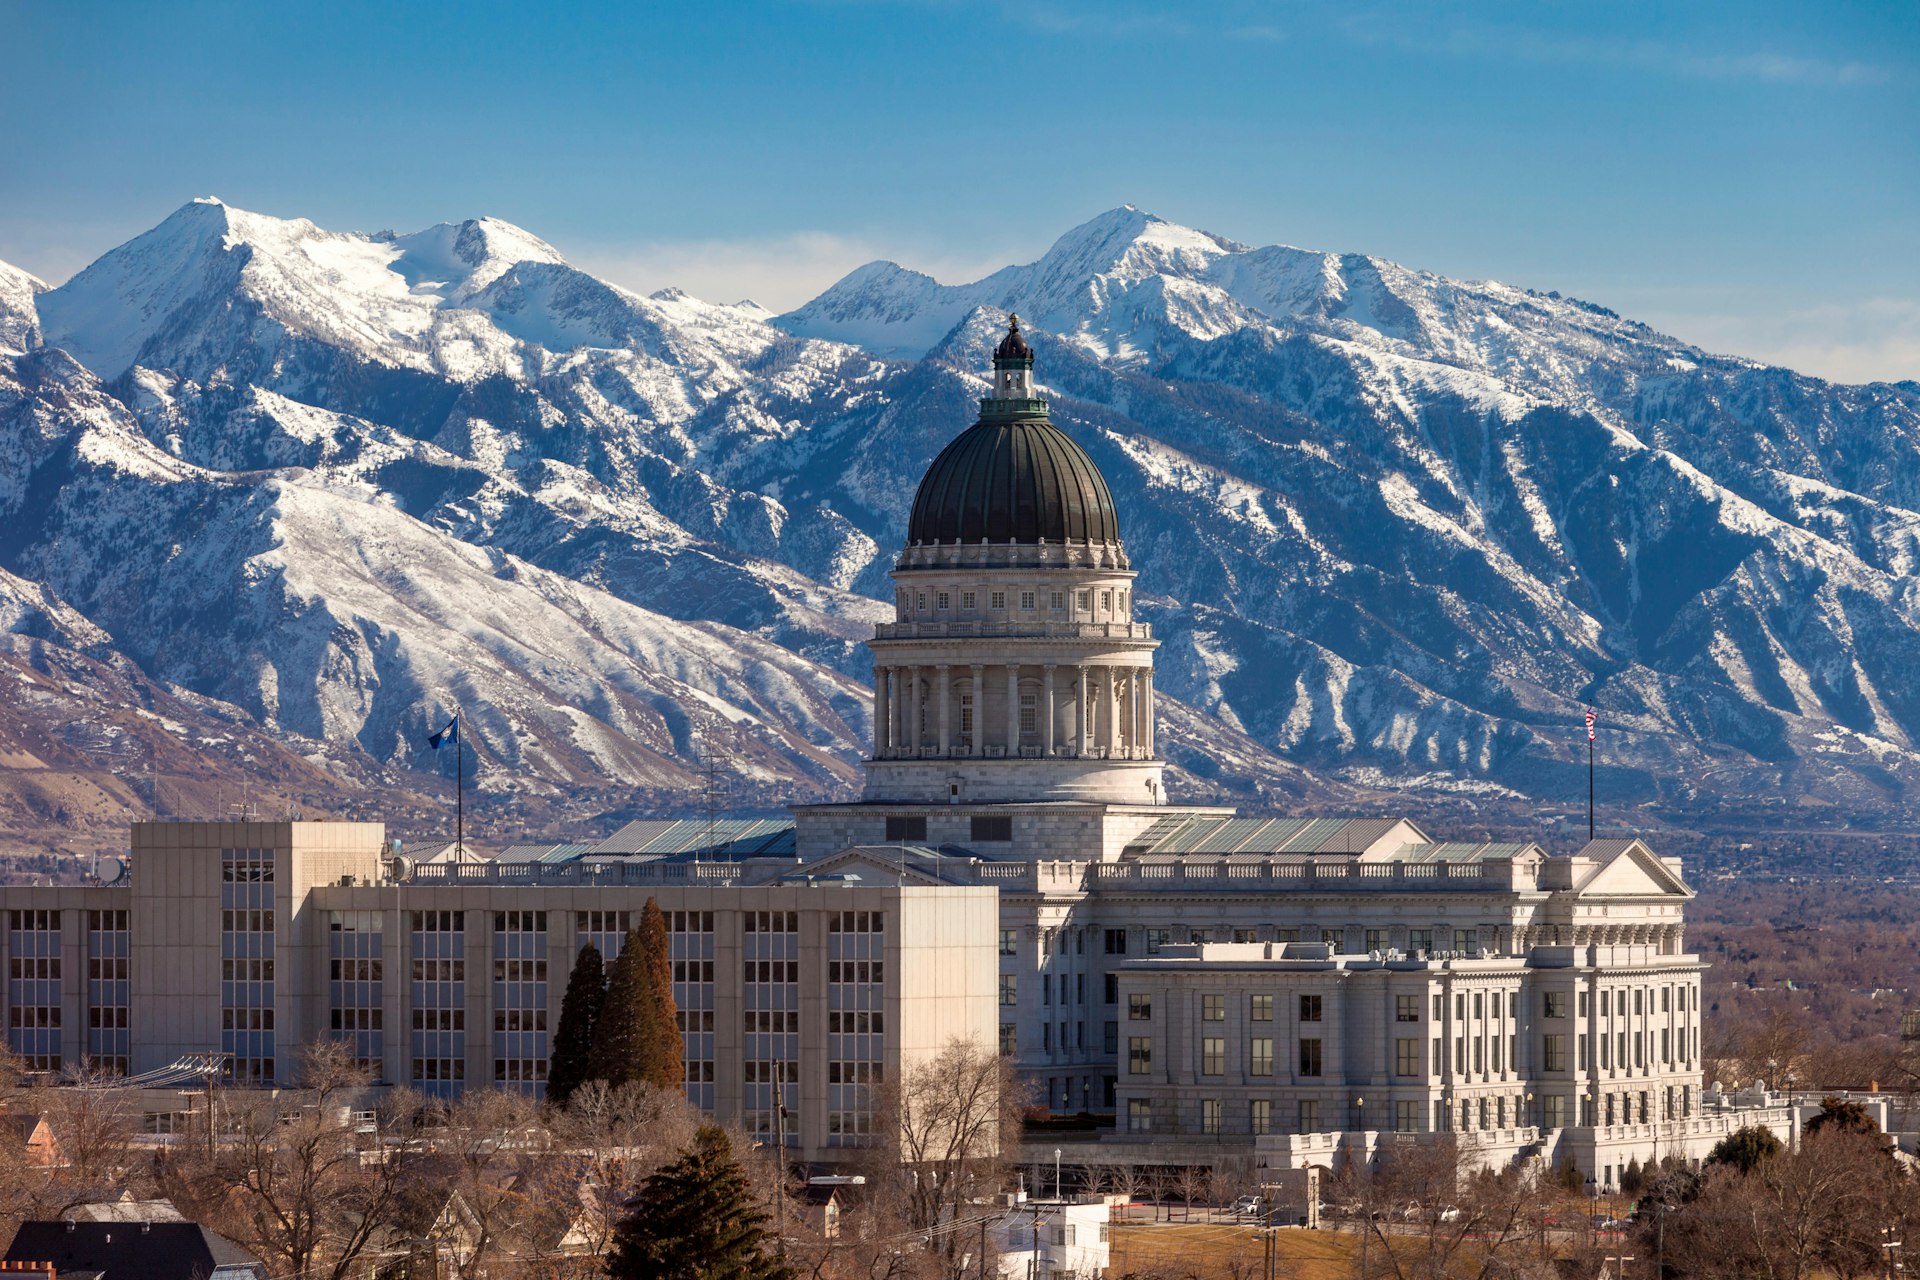 Utah State Capitol Building and the mountains of the Wasatch Range beyond, Salt Lake City, Utah, USA